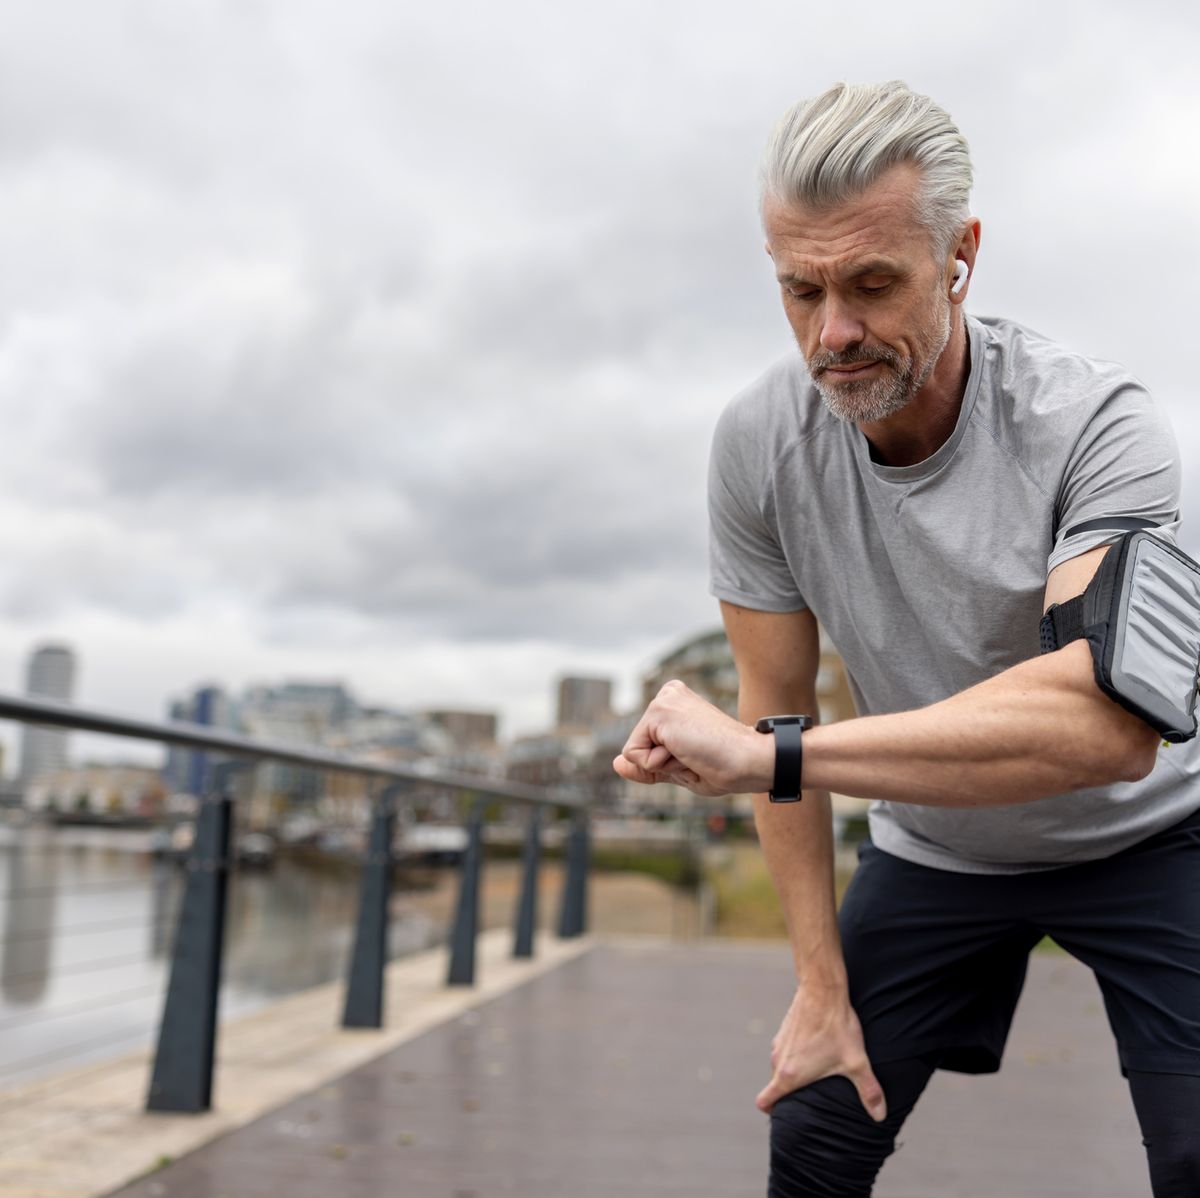 Focus on Fitness With A Senior Men's Health Workout Routine